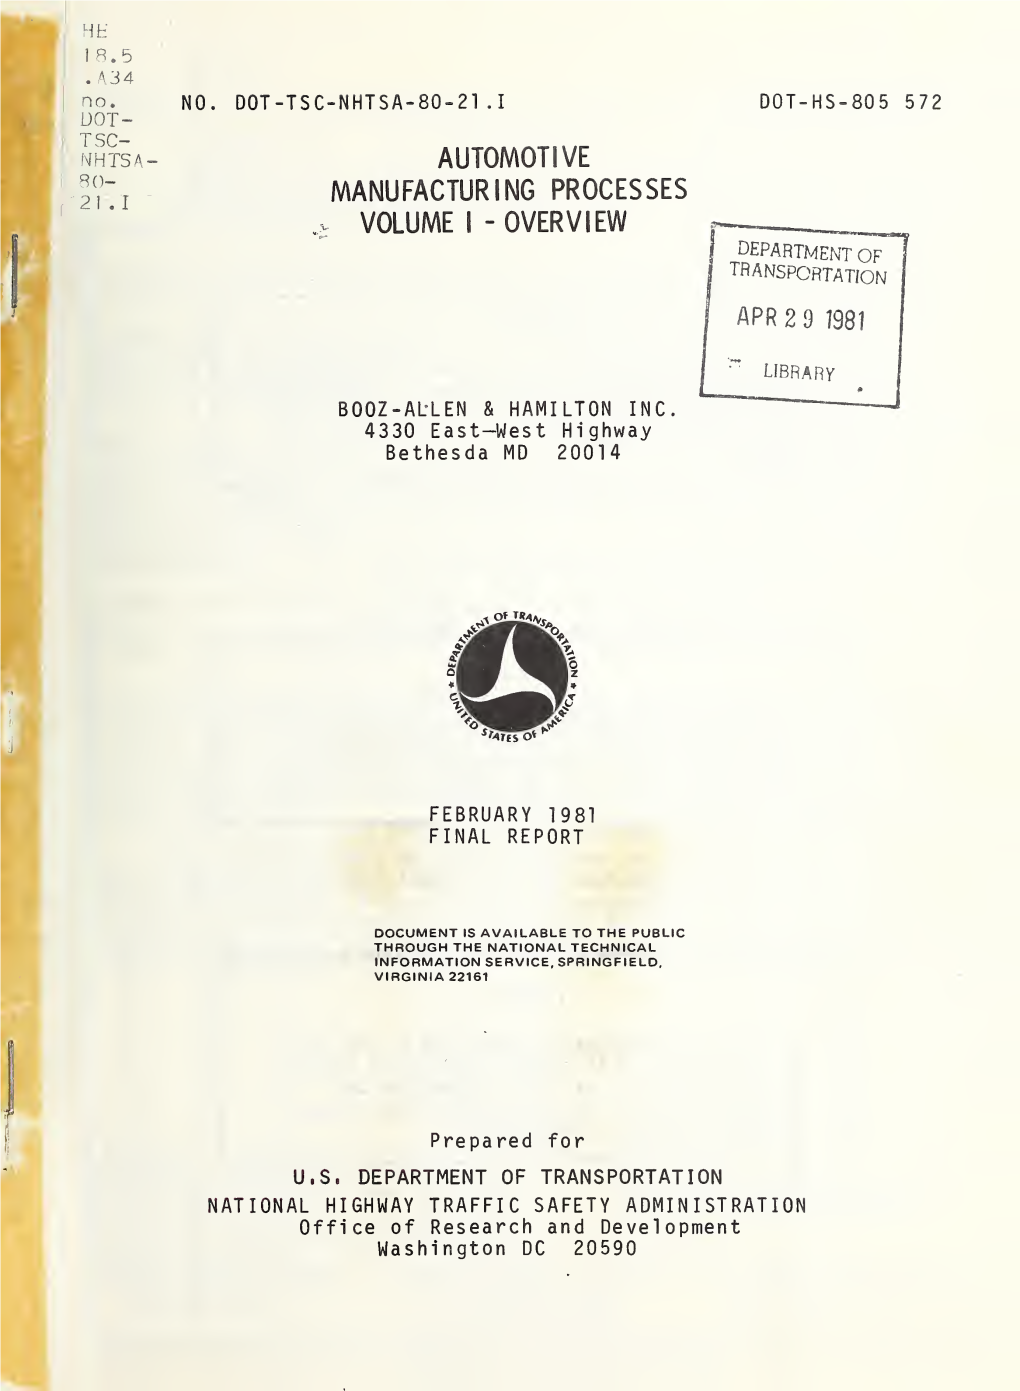 AUTOMOTIVE MANUFACTURING PROCESSES February 1981 Volume I - Overview 6